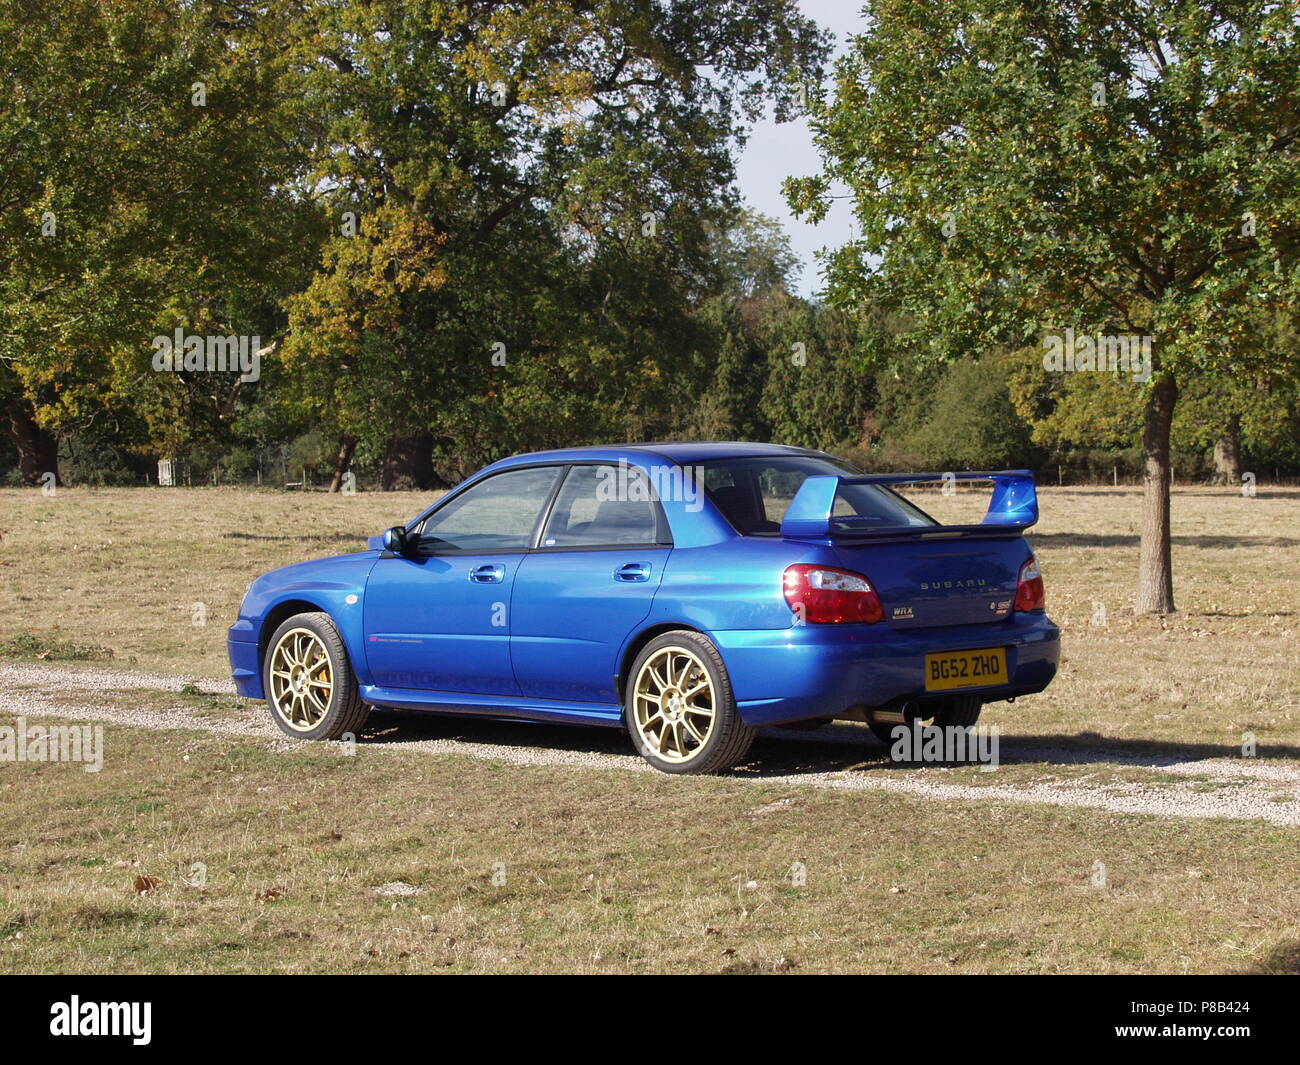 Subaru Impreza Wrx Sti In Wr Blue Pearl Colour With Alloy Wheels - Showing Side And Rear View Stock Photo - Alamy